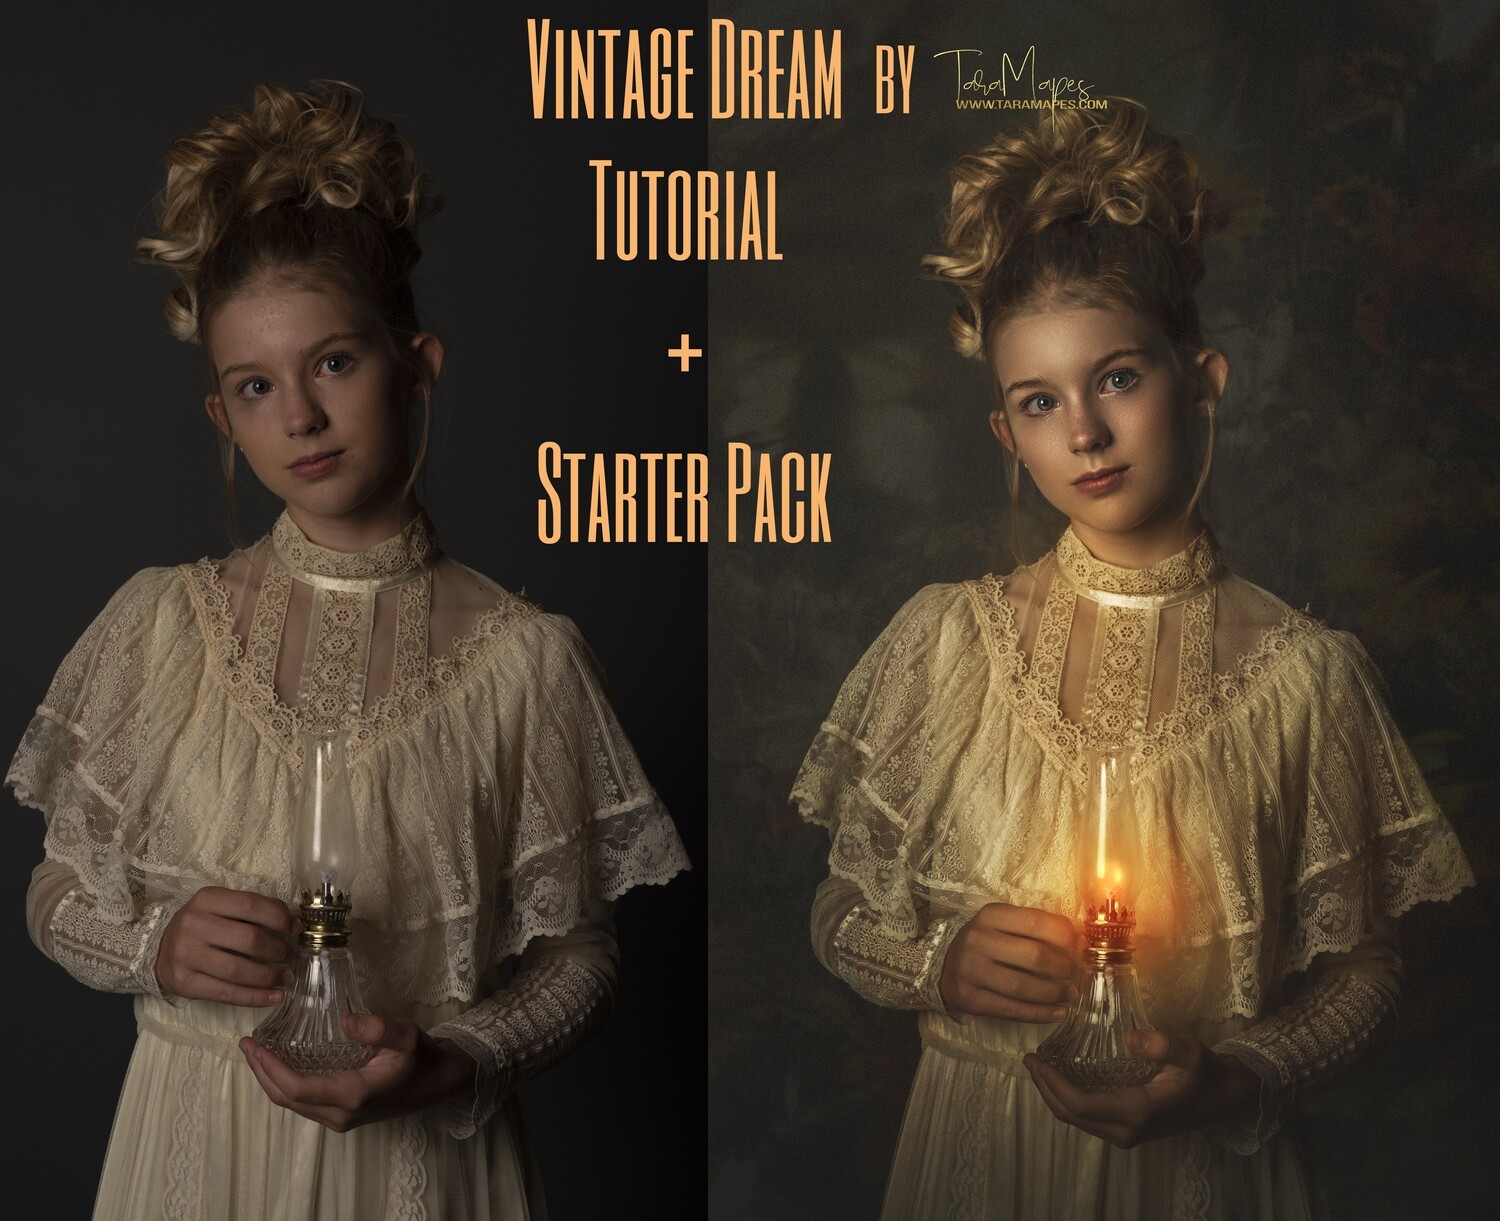 Vintage Dream Fine Art Painterly Photoshop Compositing Tutorial with  STARTER PACK- Fine Art Tutorial by Tara Mapes